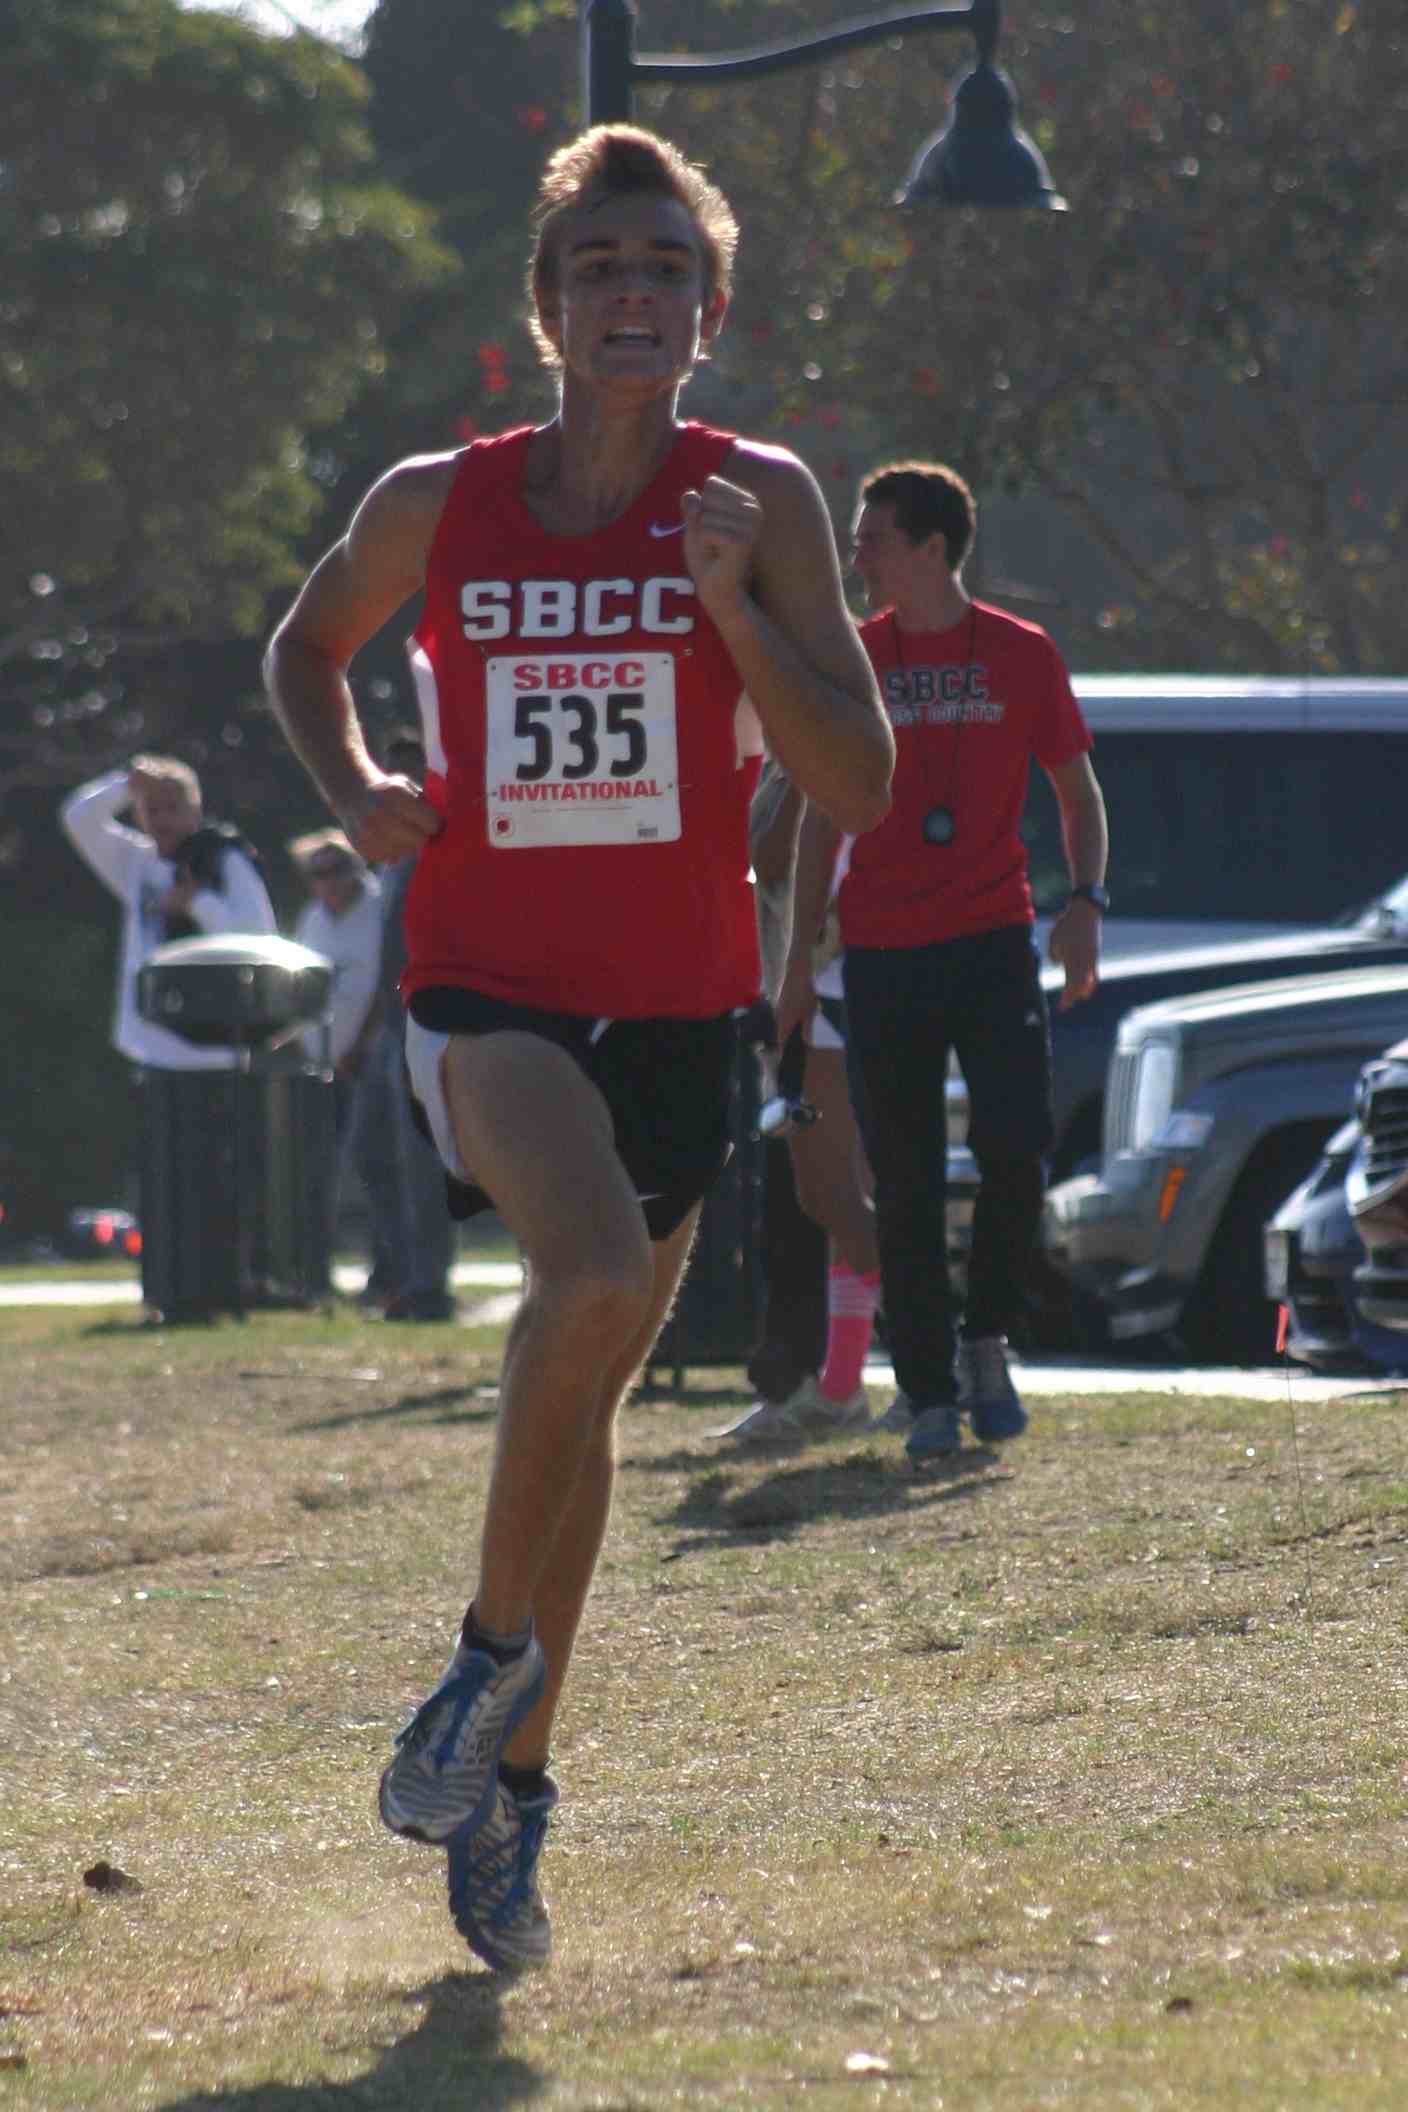 Ian Robers took first place at the SBCC Invitational cross country race.